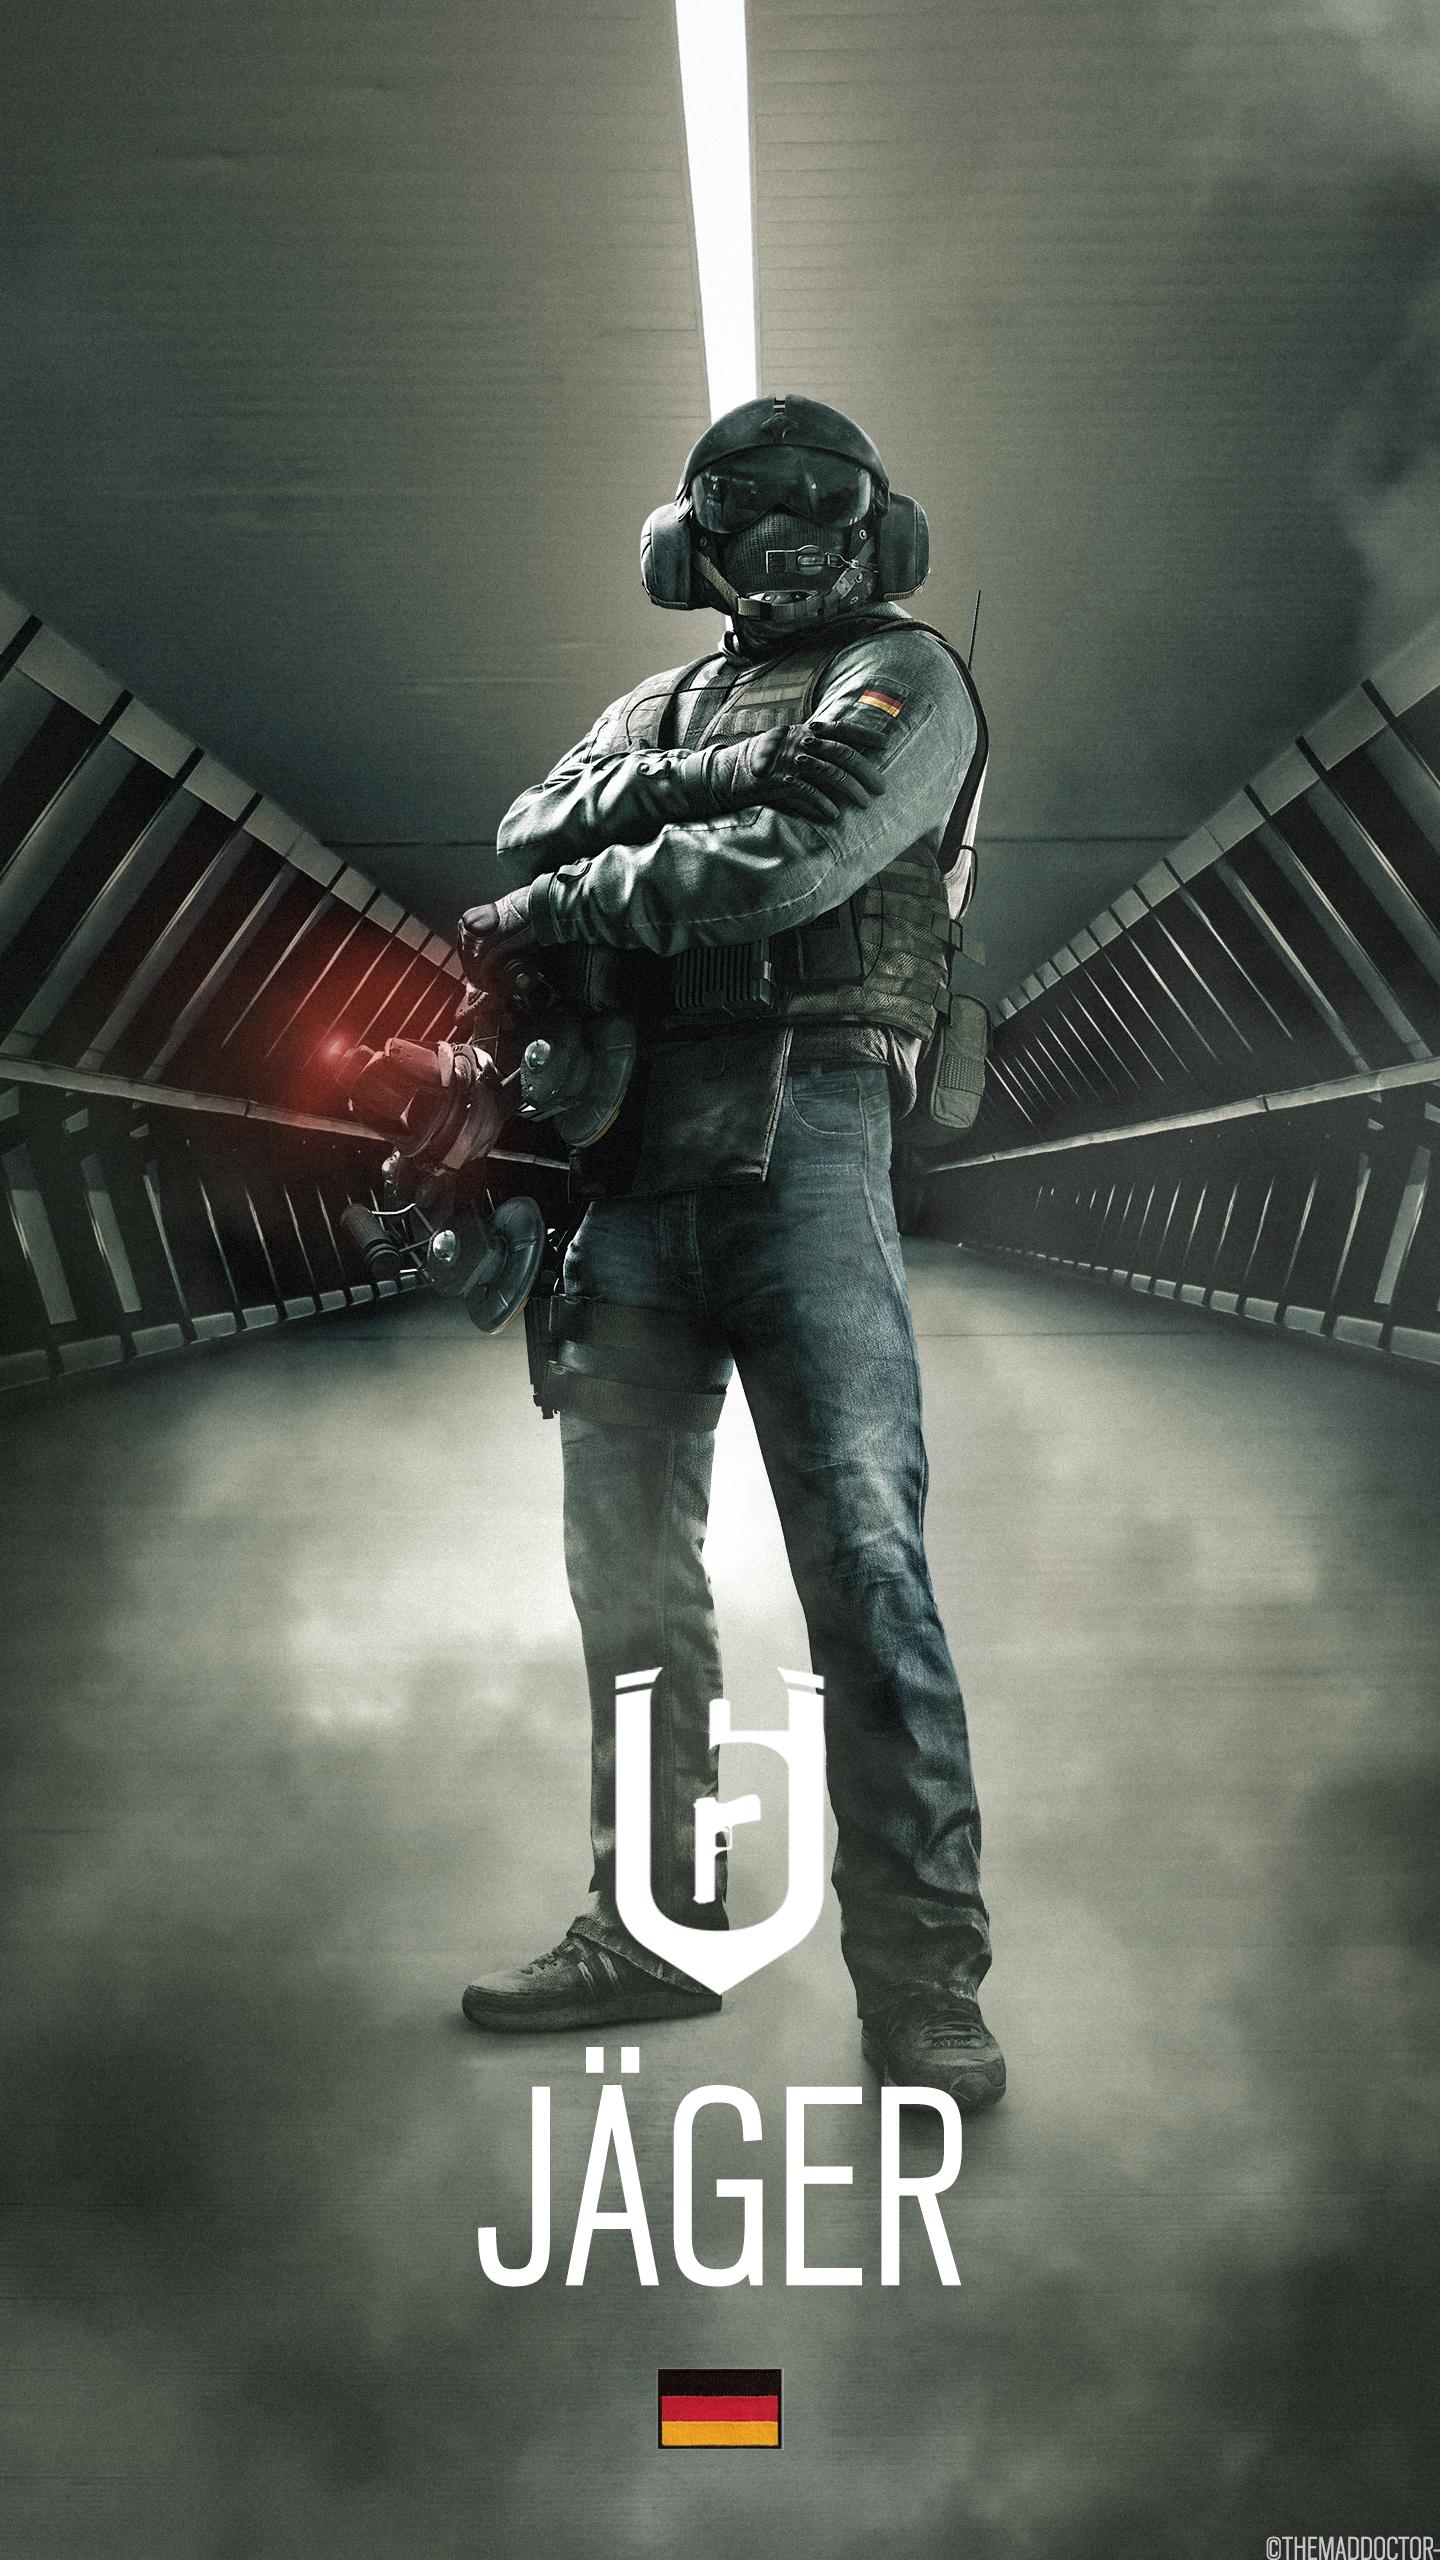 They said that Jäger's phone wallpaper could not be done. They were wrong